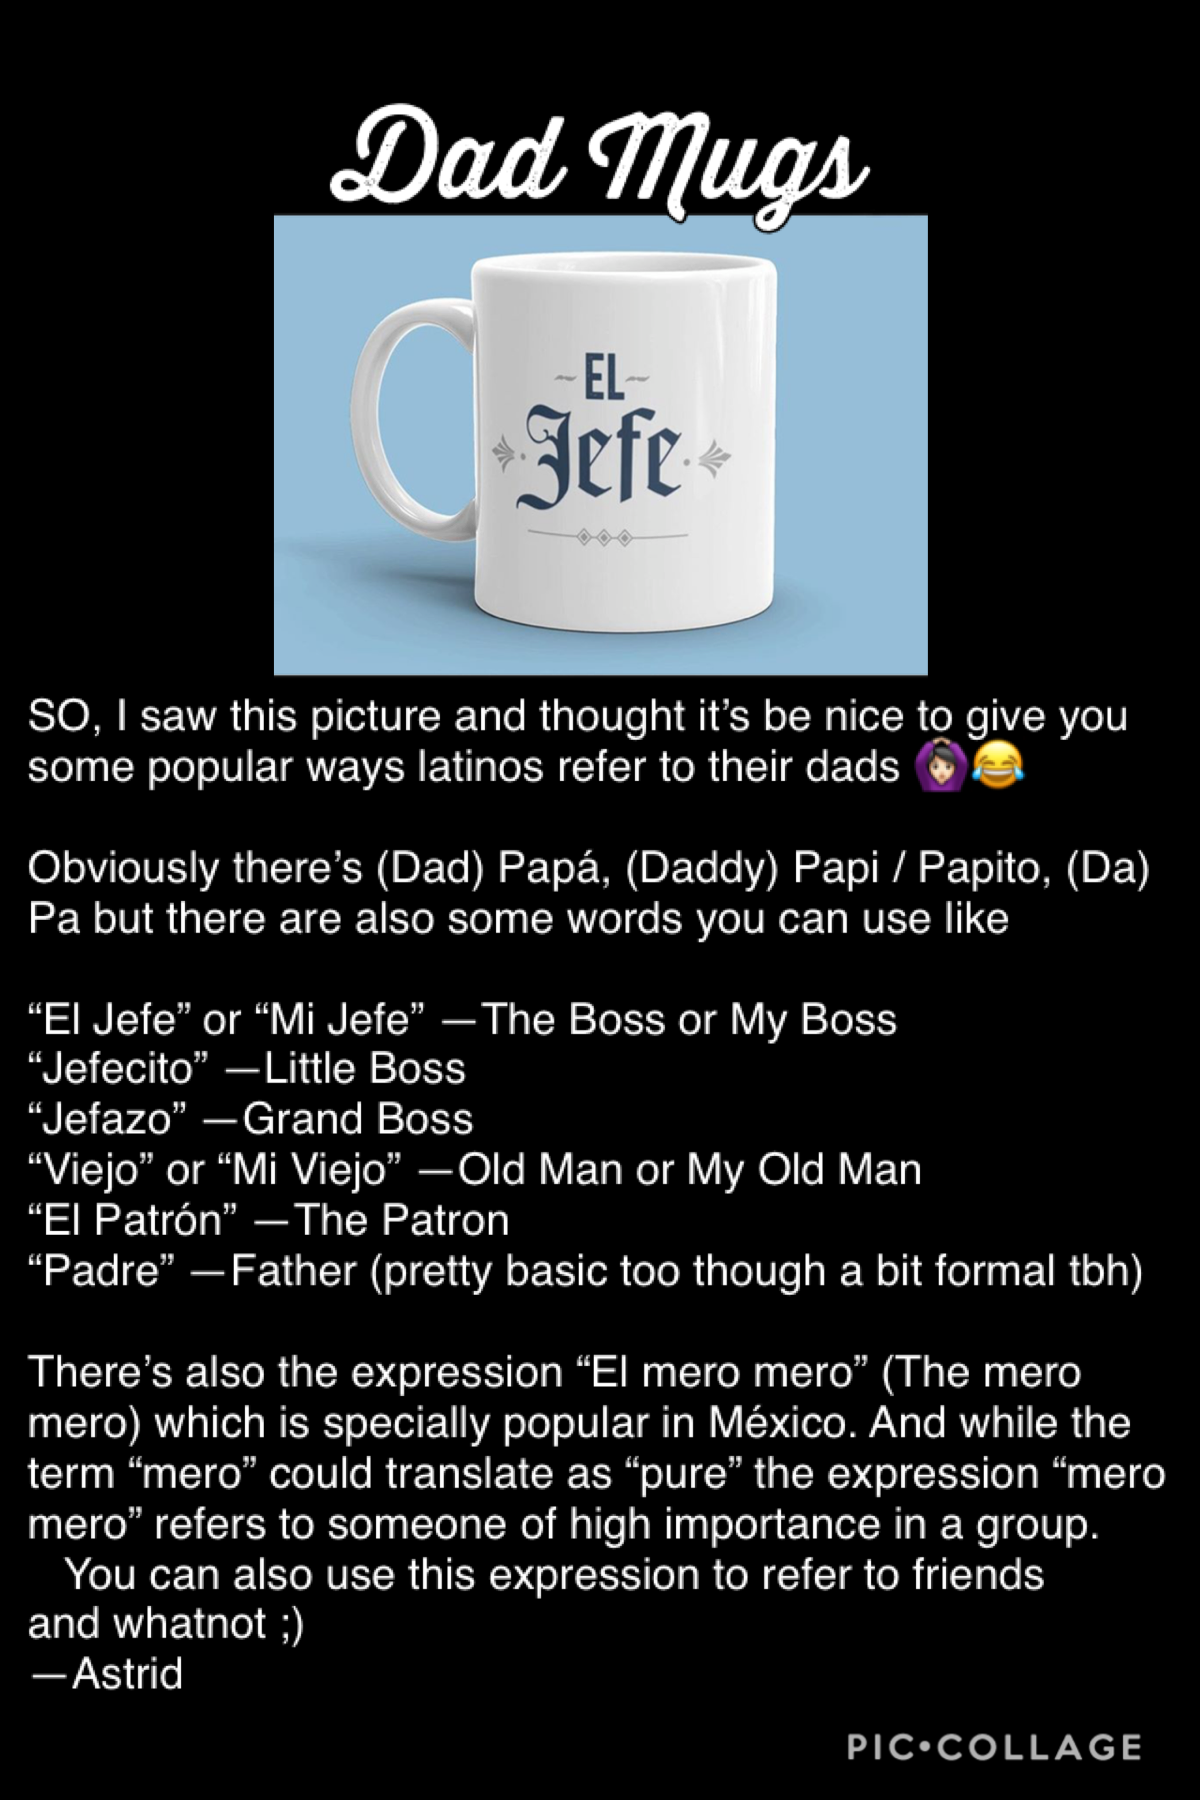 omg latino memes LOVE to use “mi jefe” 😂✨ hope you learned something new here and that your day has been going great 😂☺️💖 (also latinos pls help me if i missed an important one 😂💗)